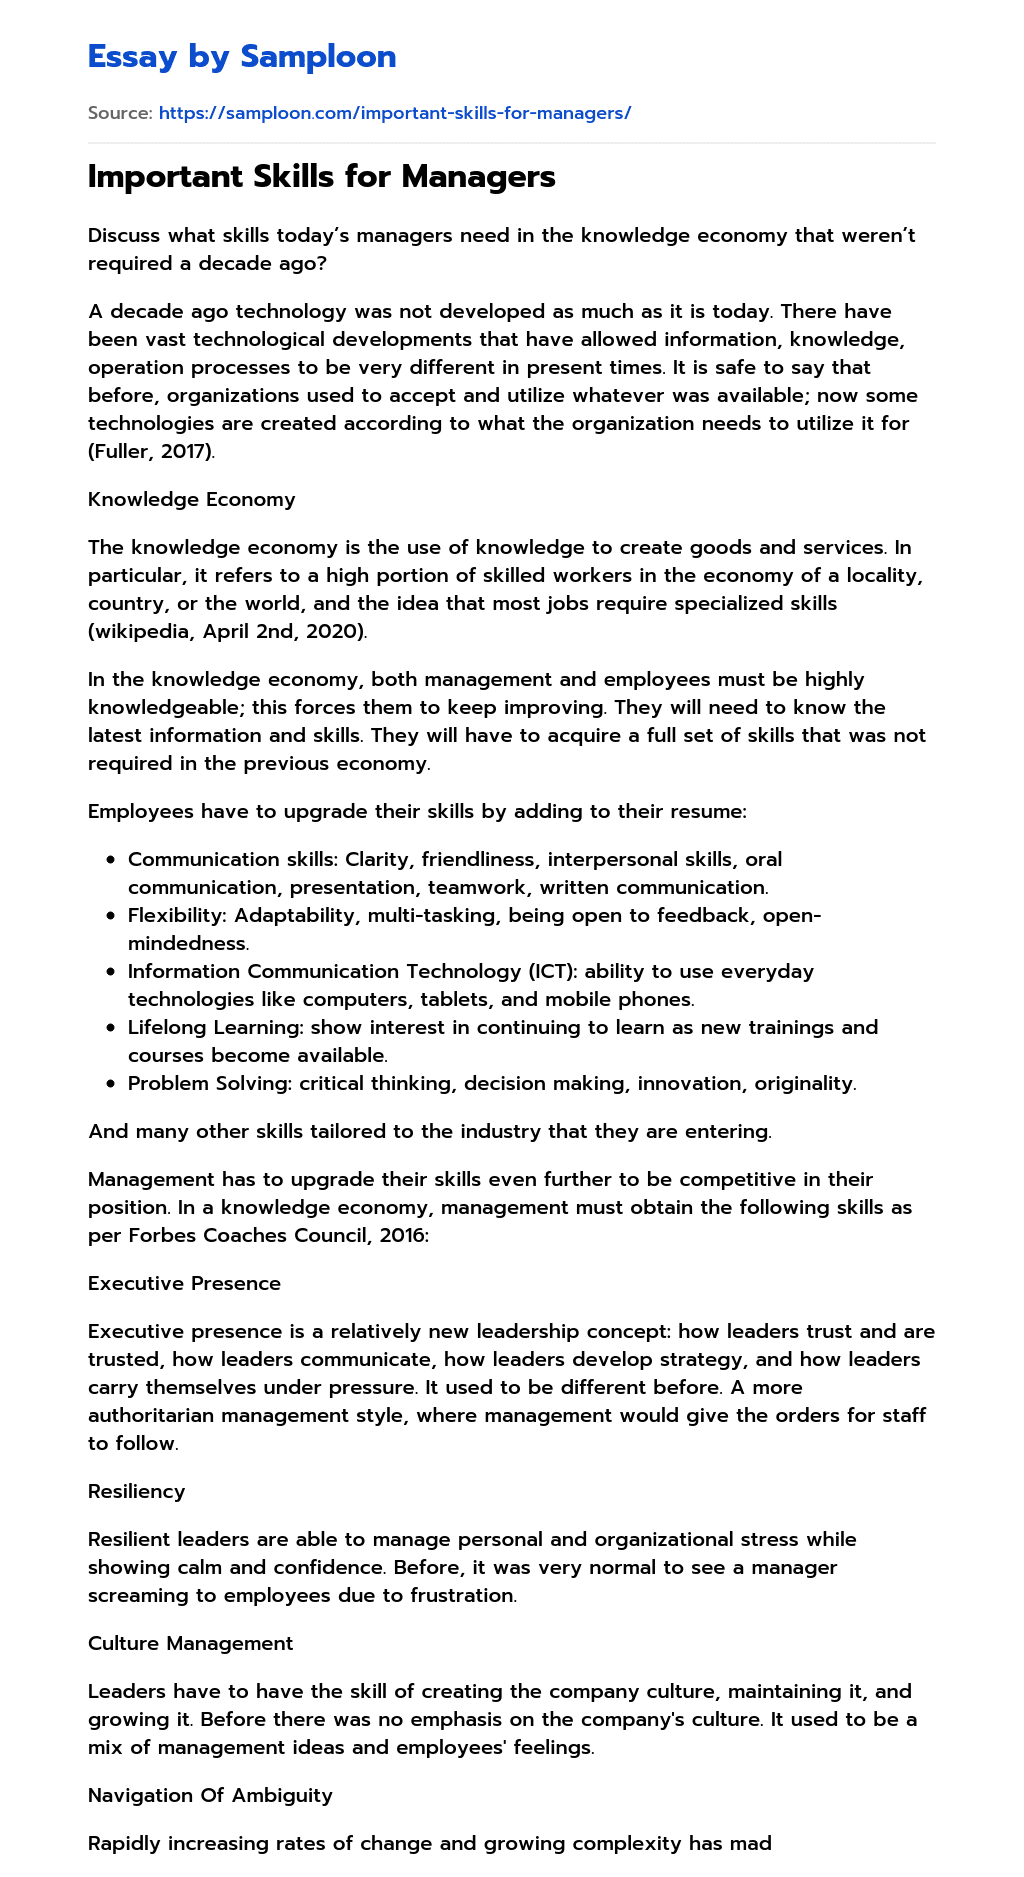 Important Skills for Managers essay